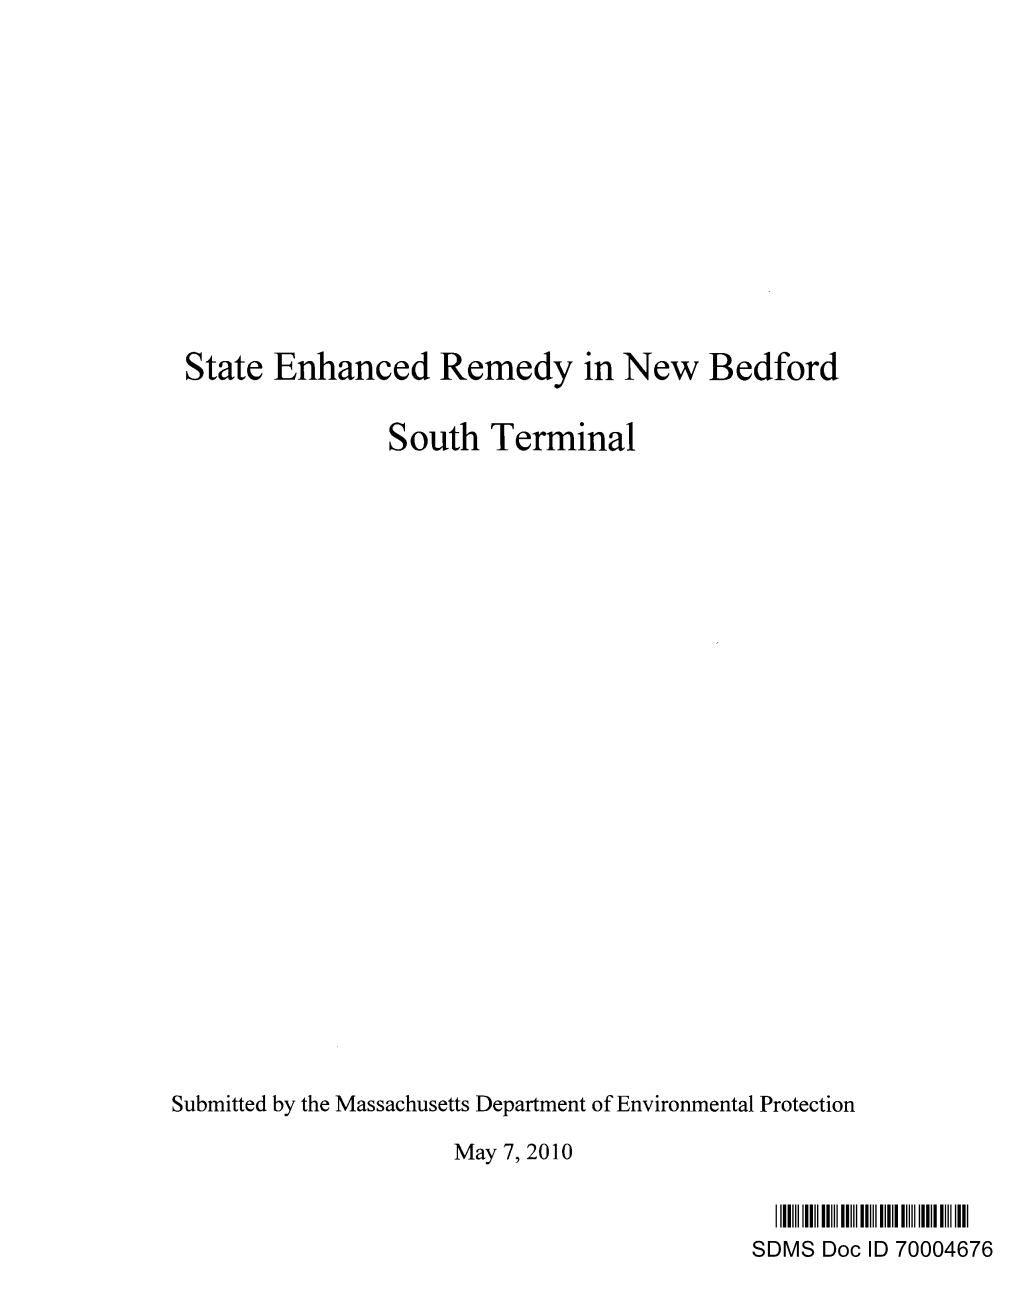 Submittal of Materials Regarding State Enhanced